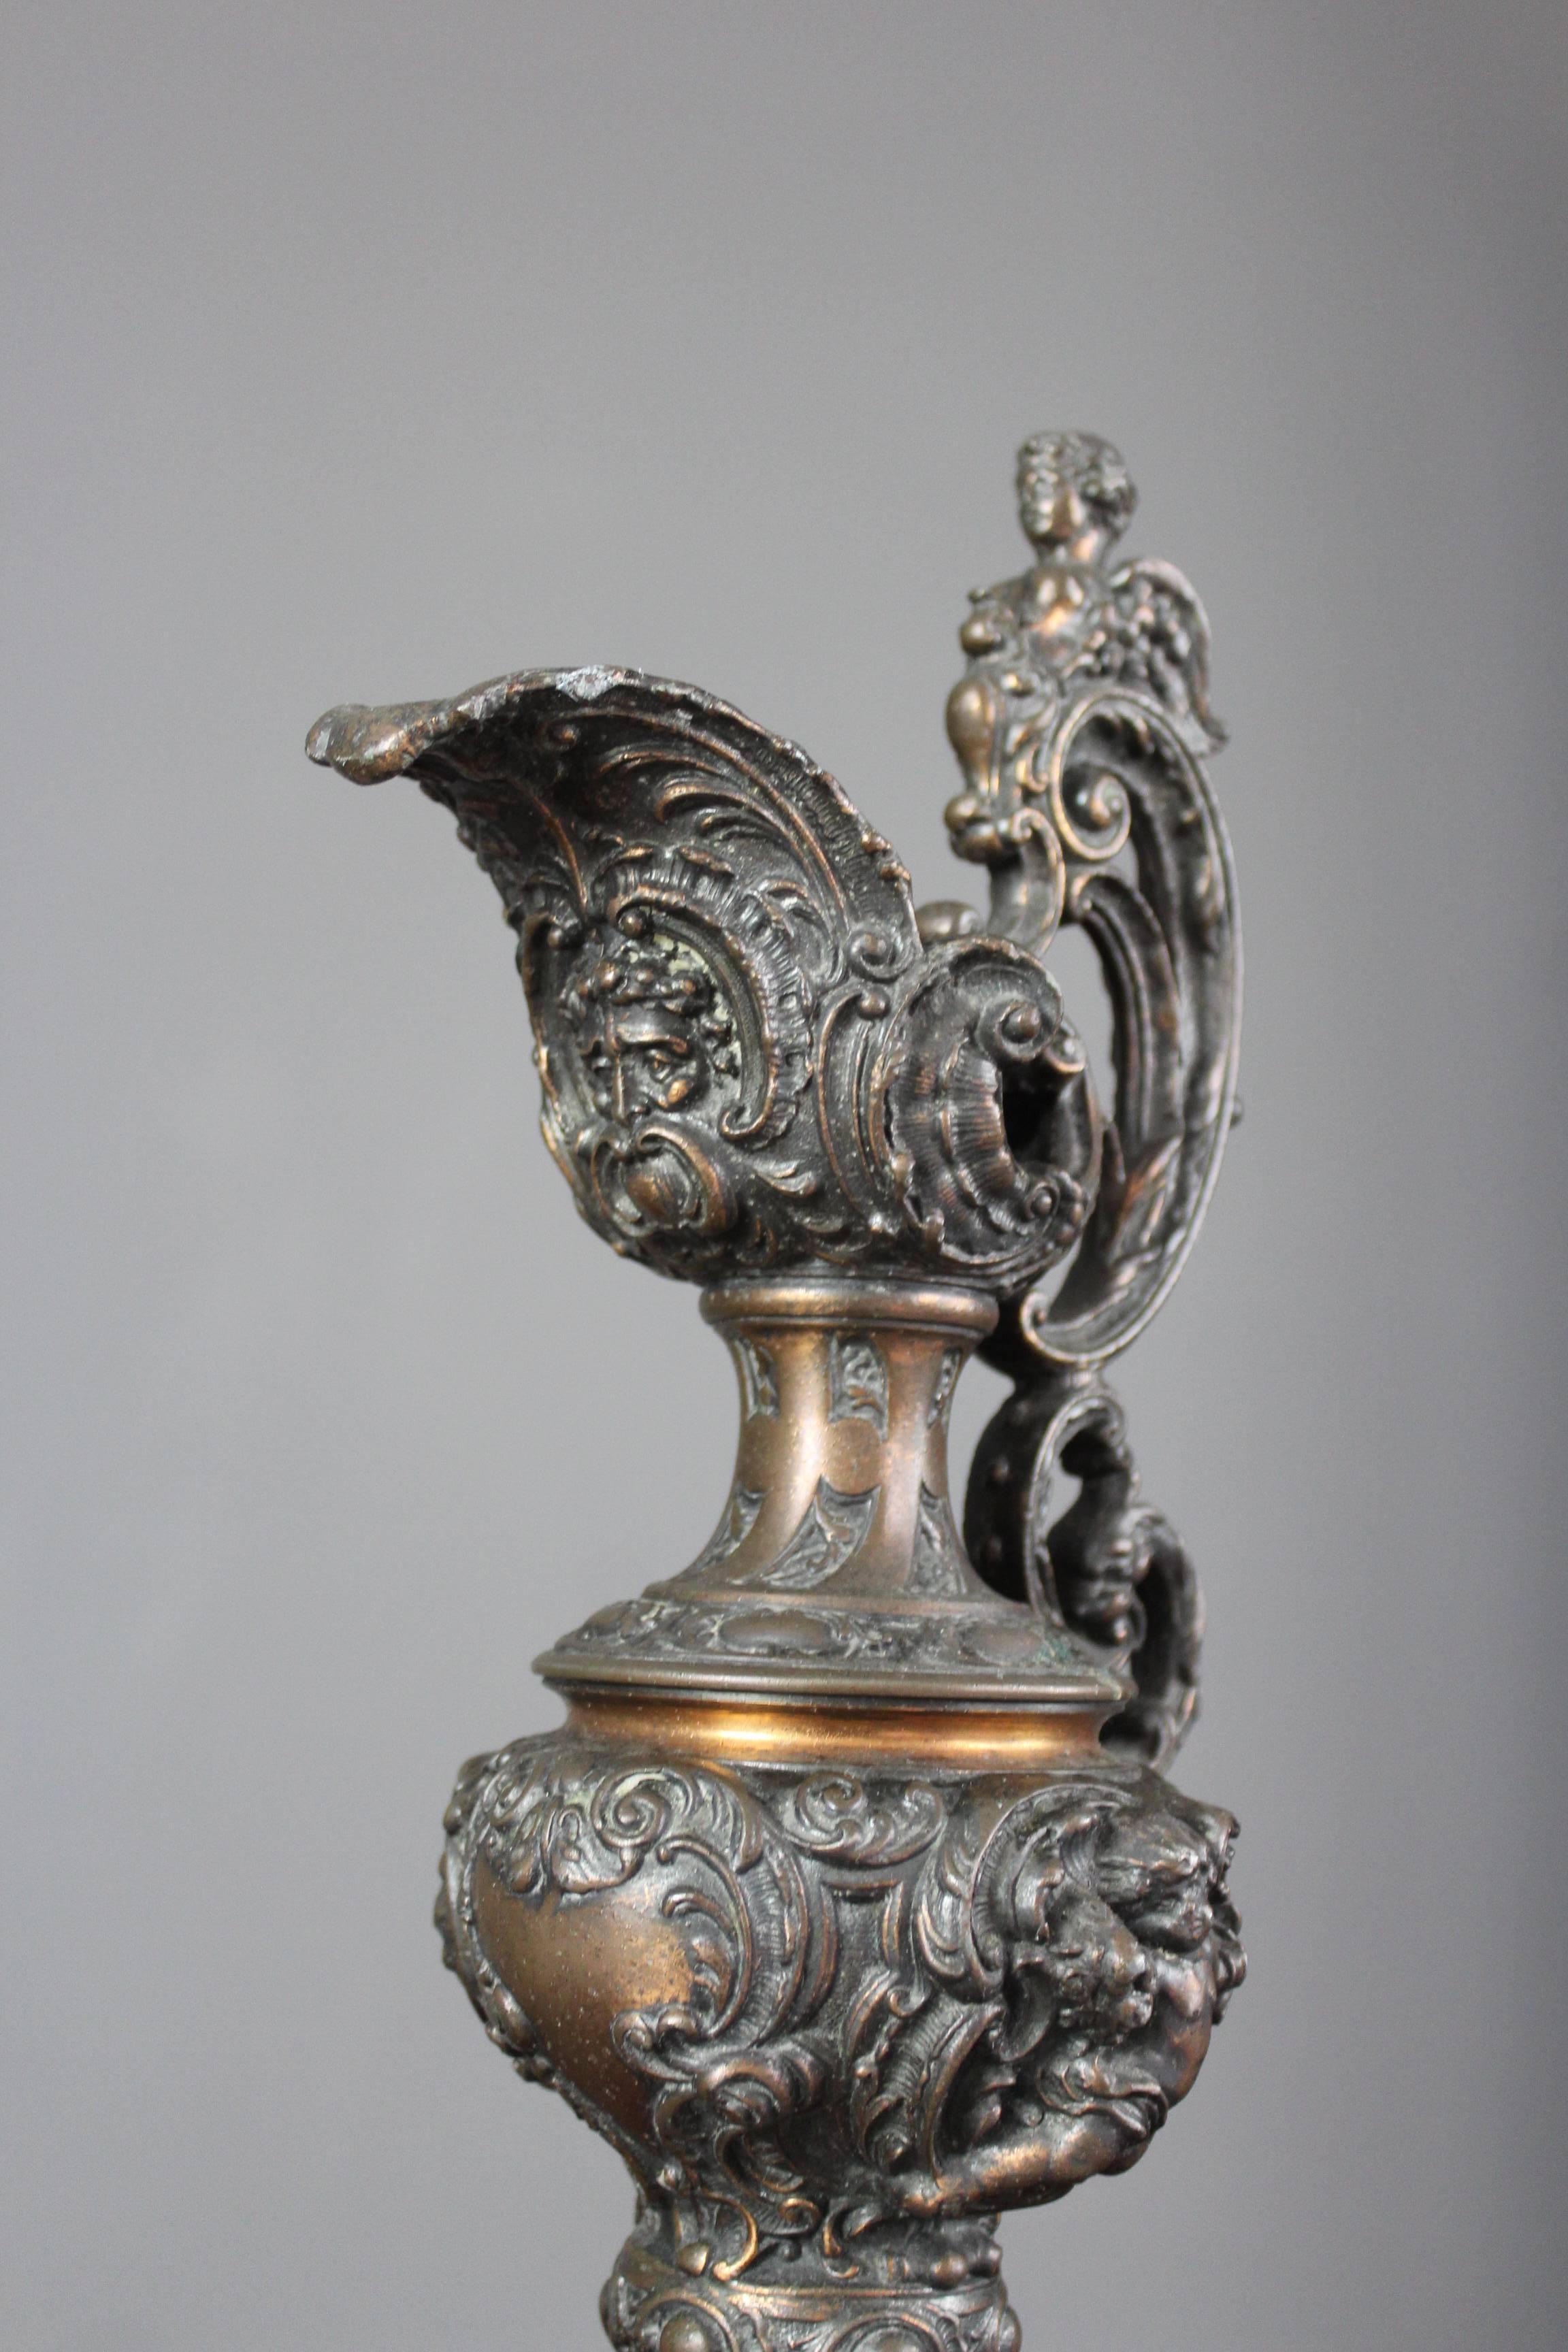 Ornamental Ewer, of spelter and patinated as bronze, moulded with a large spout, narrow neck, the body with children amidst rococo scrolls and foliage, applied with a very ornate handle, formed of c-scrolls and foliage, a sphynx at the top, circa